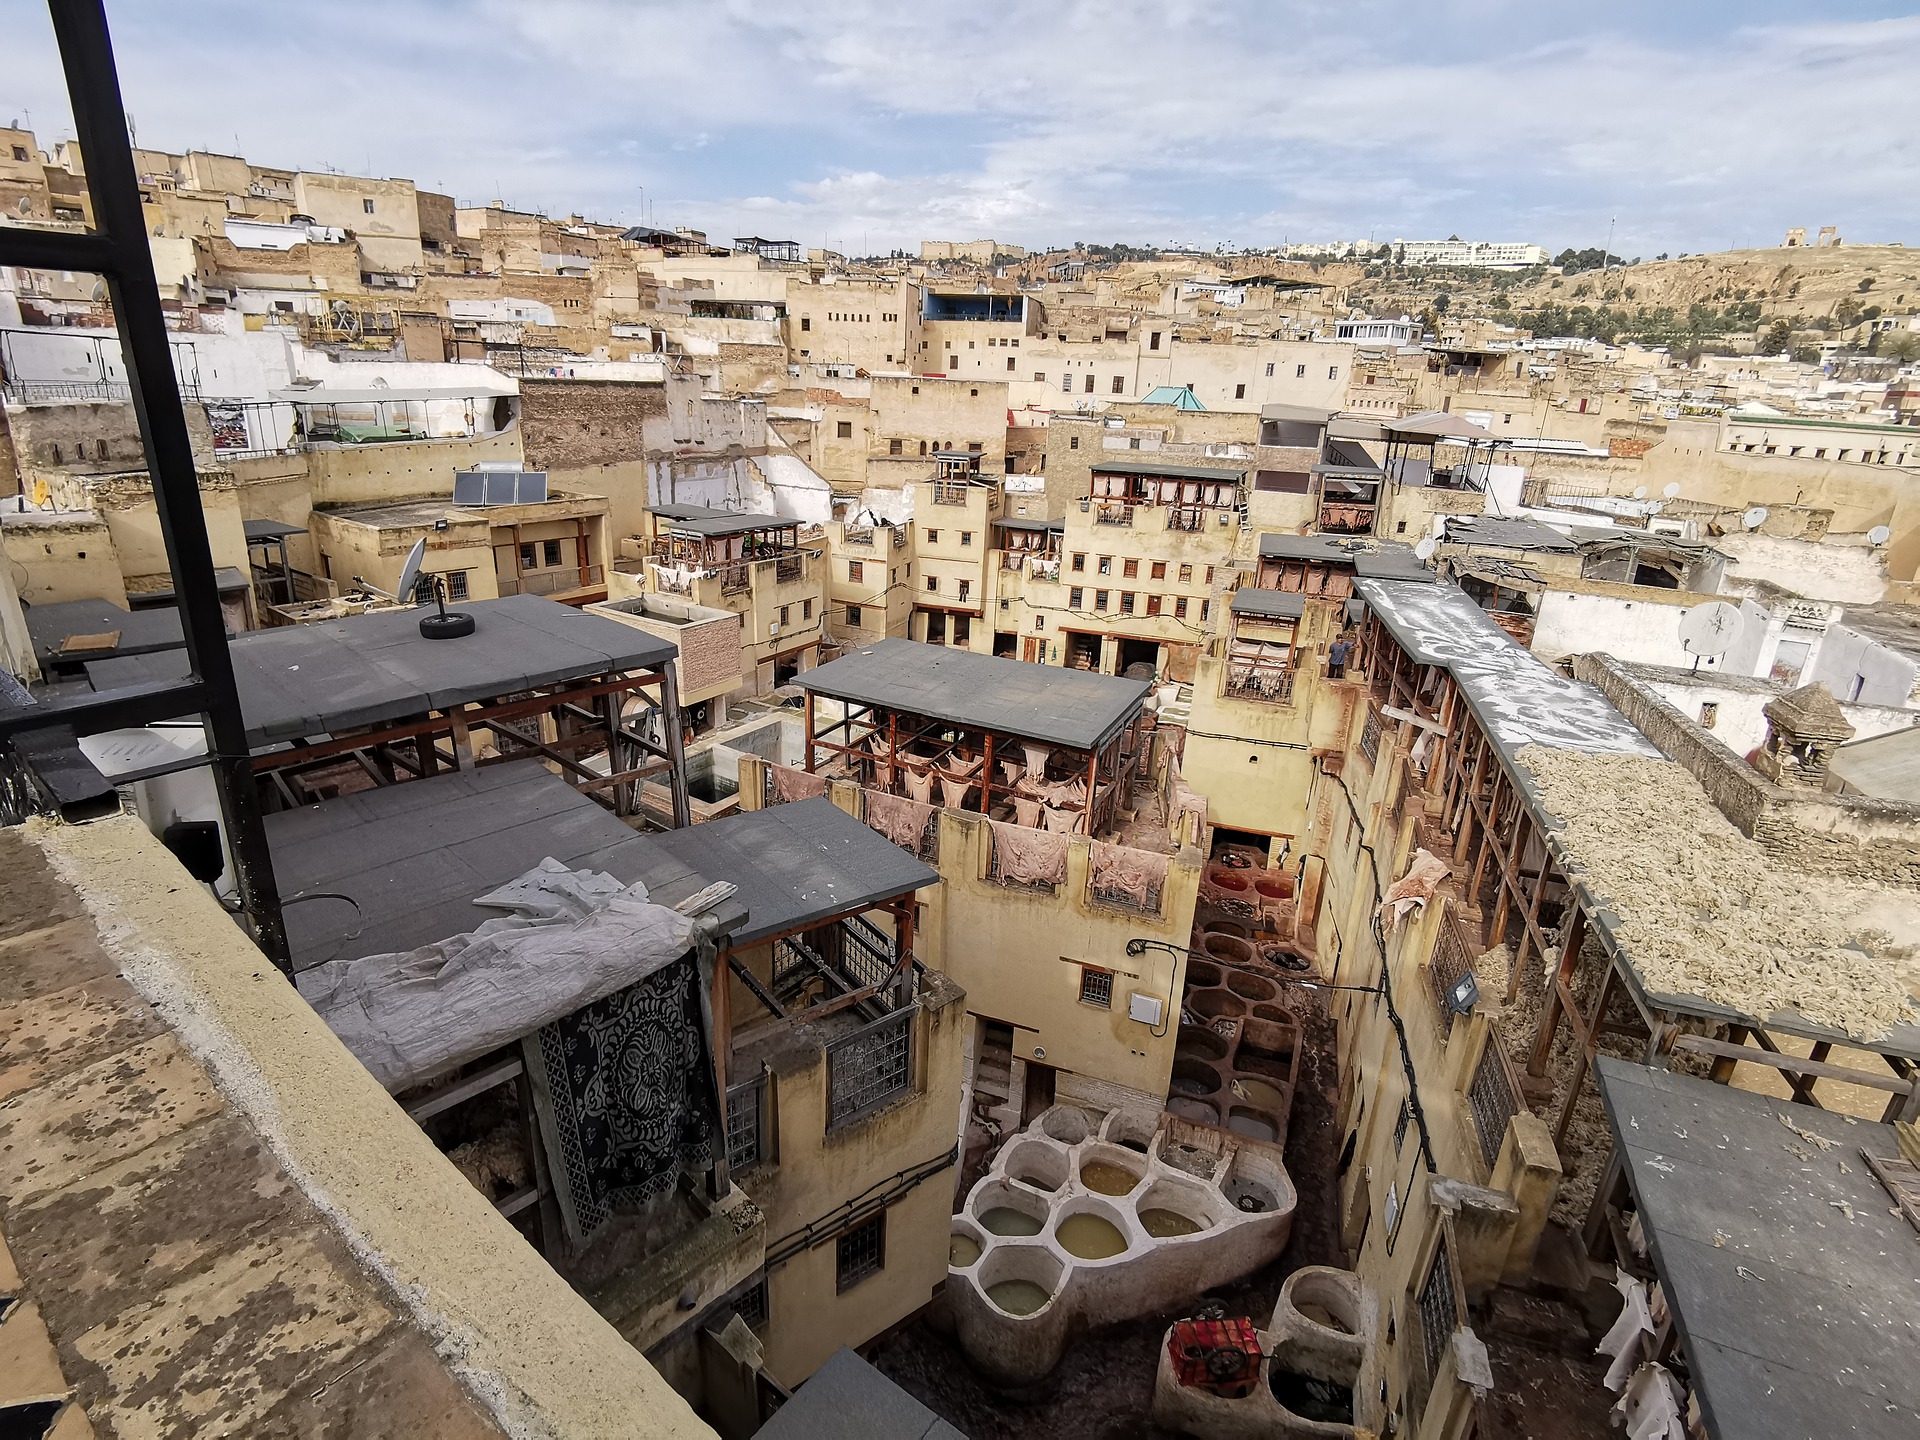 A tannery in the Medina, Fez, Morocco.